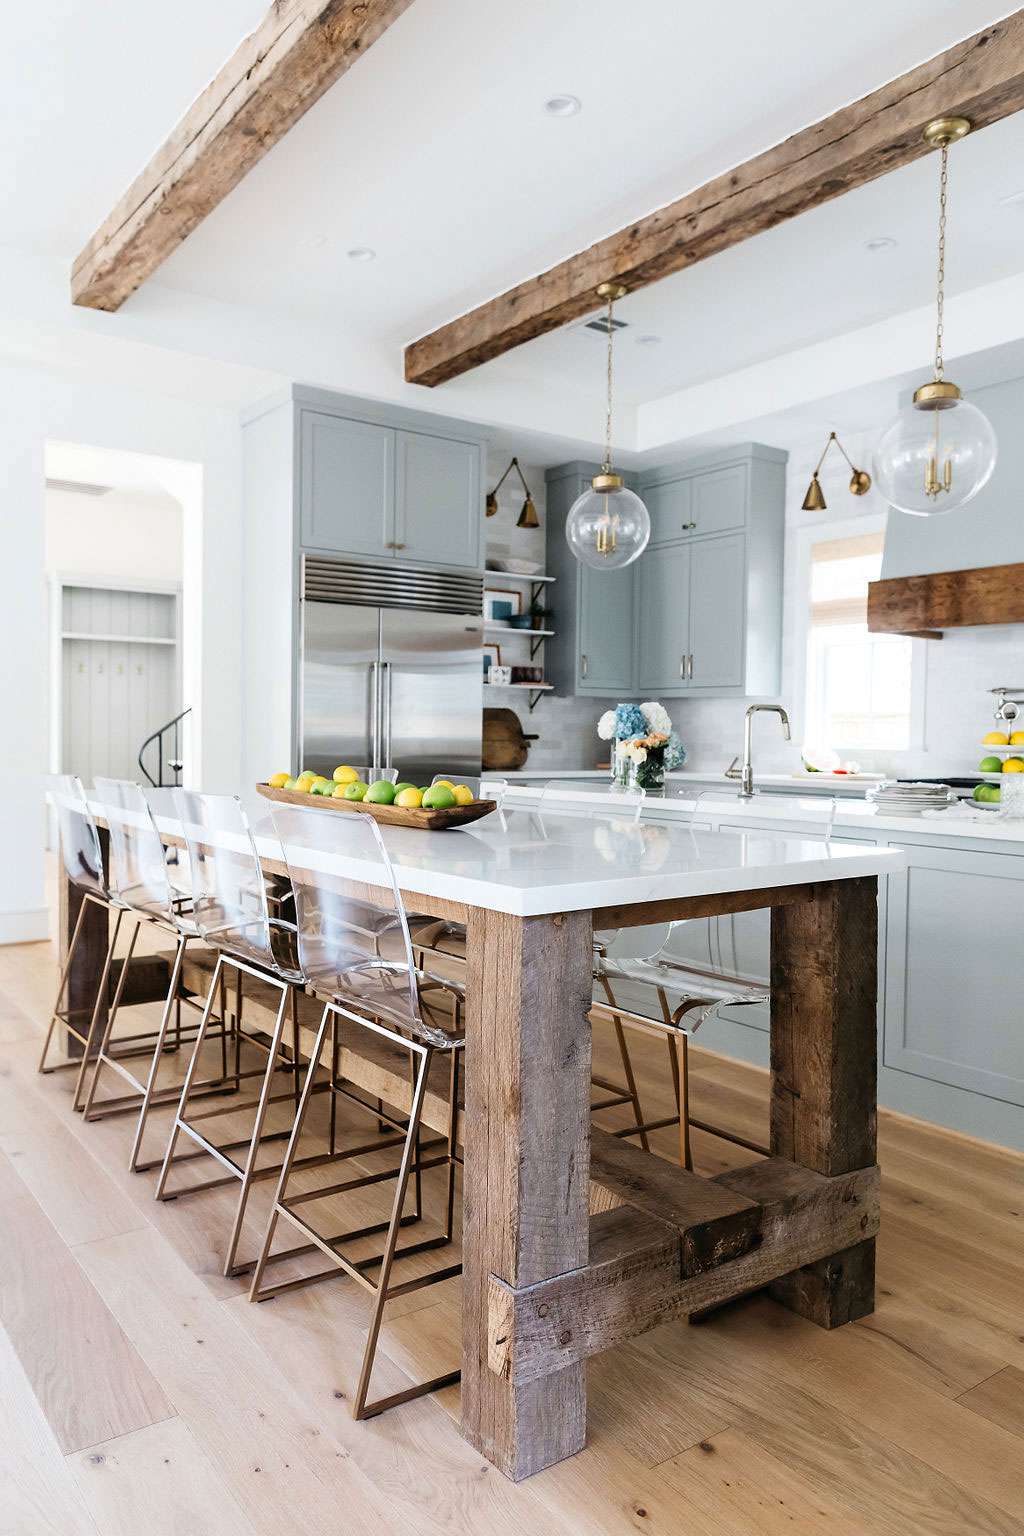 18 Designer Favorite Paint Color Ideas To Give Your Kitchen ...